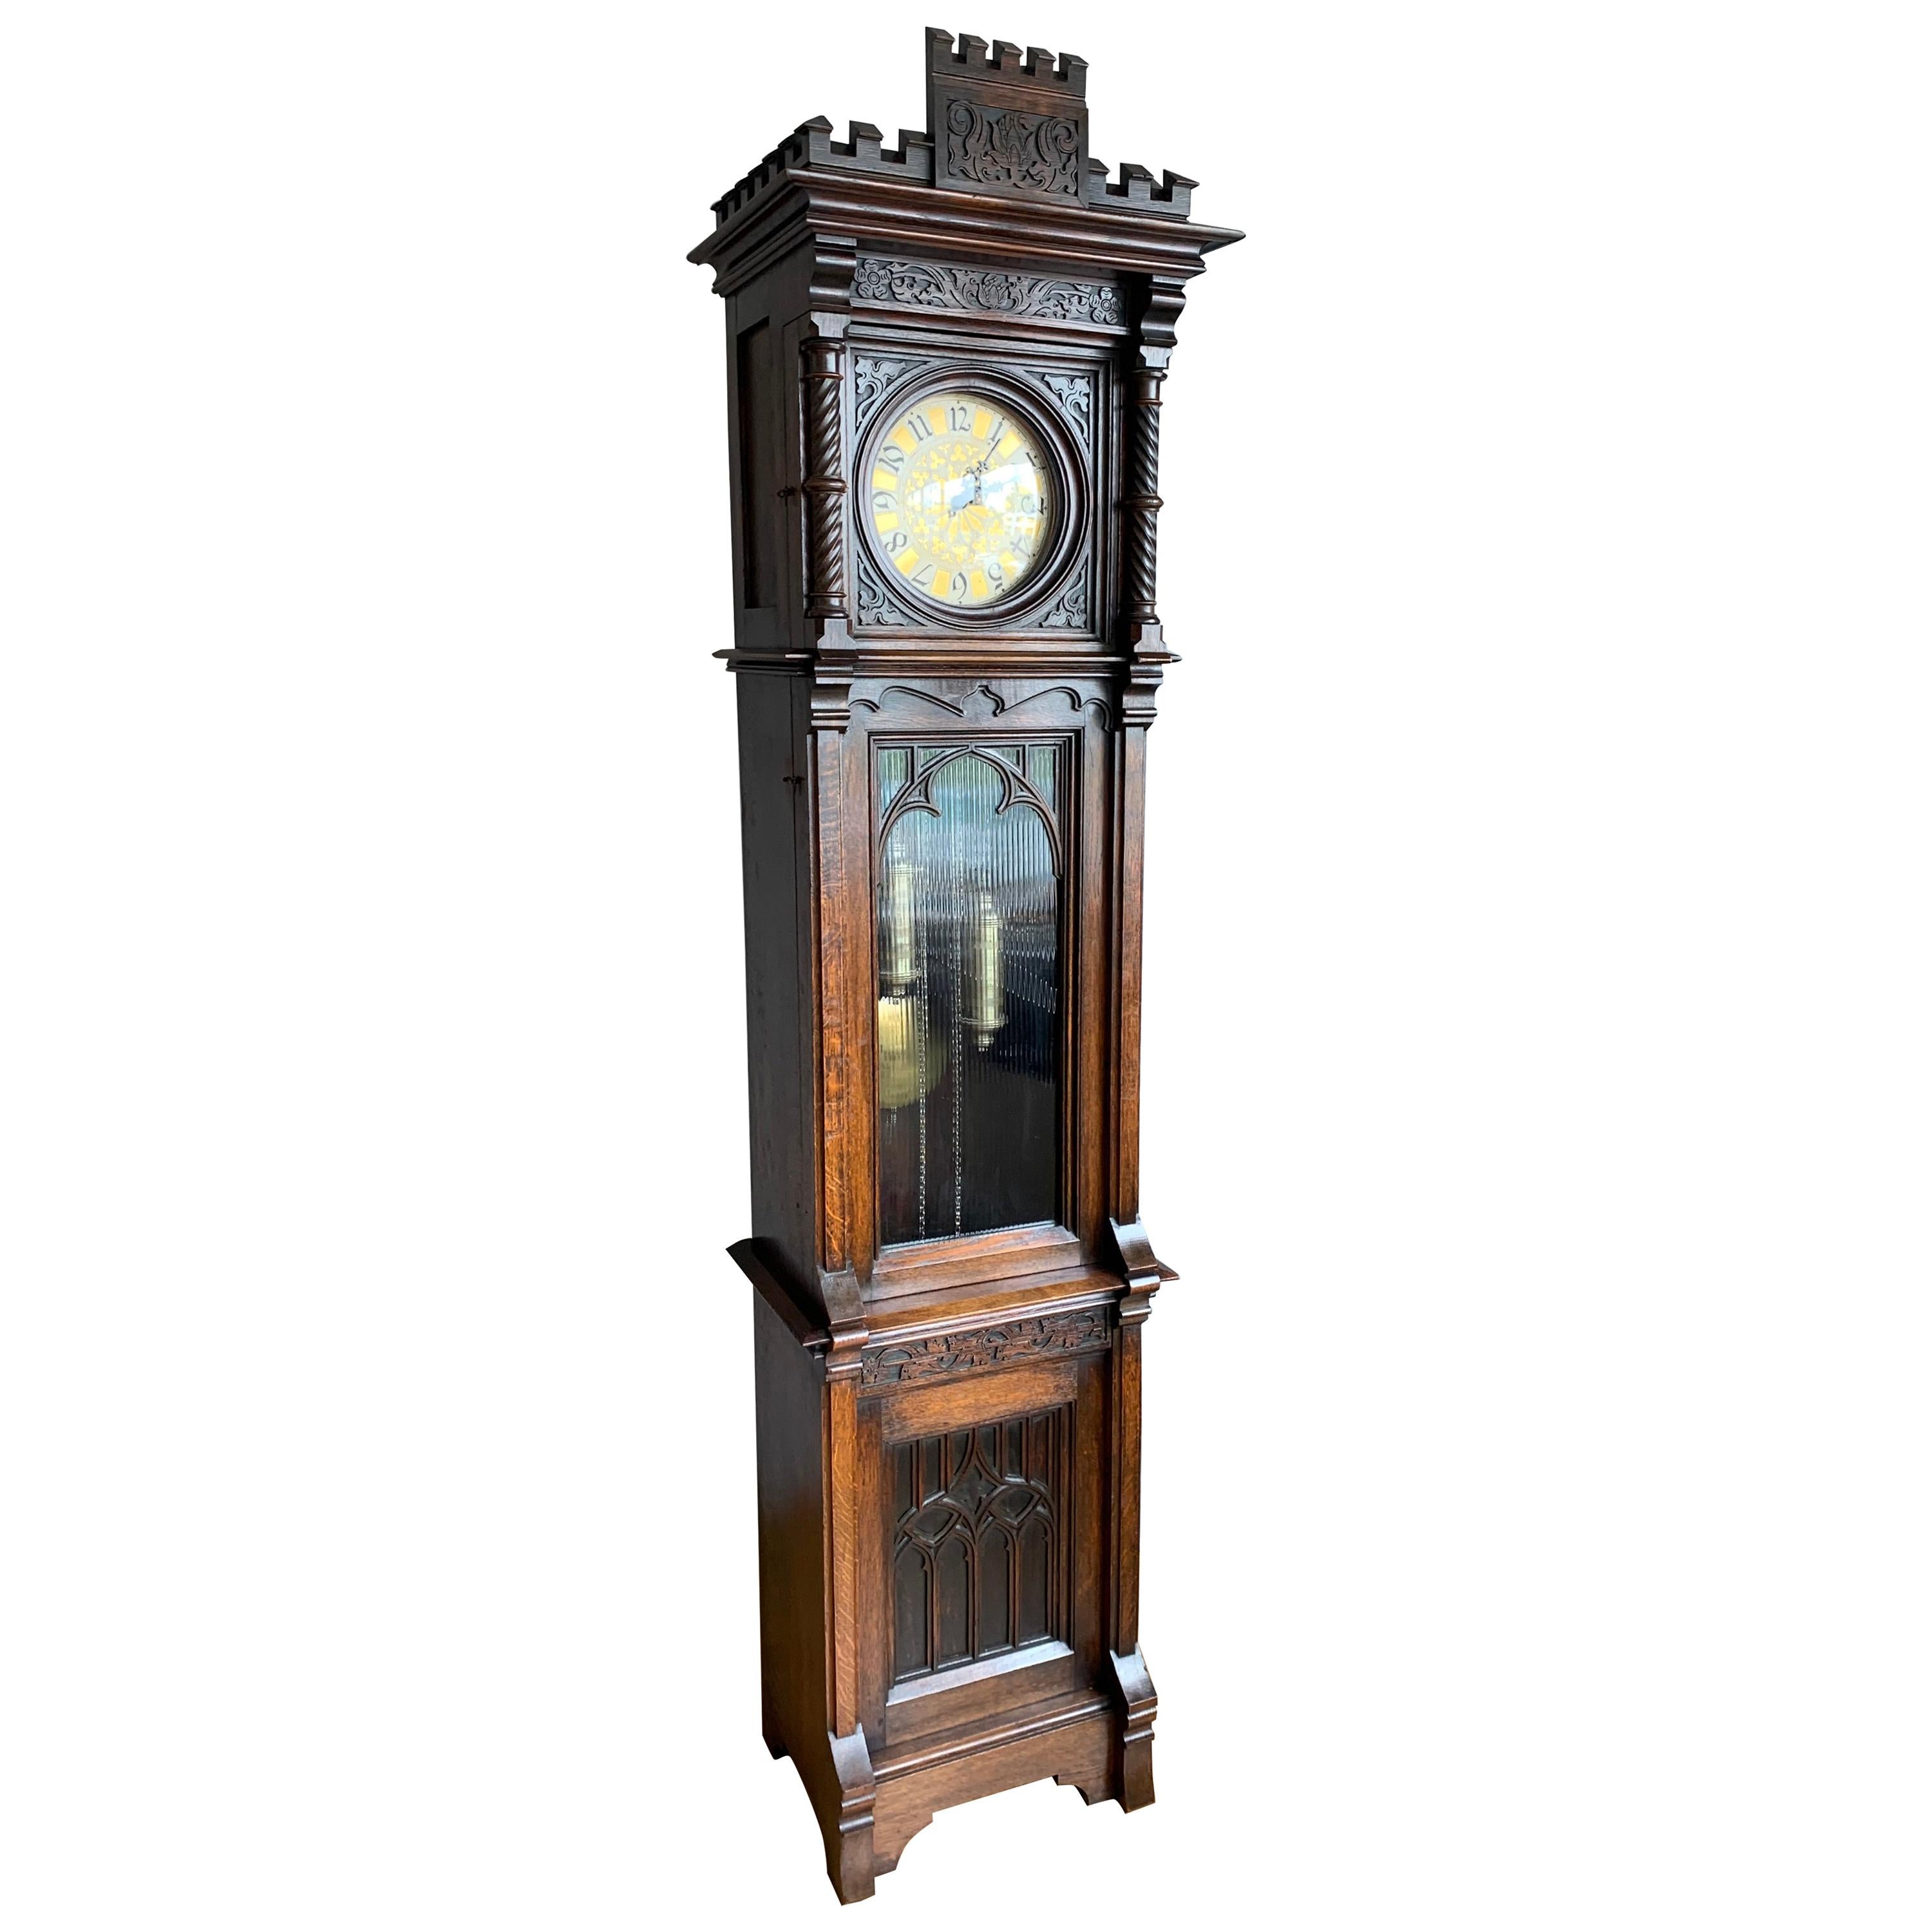 Antique and Unique, Hand Carved Gothic Revival Grandfather or Longcase Clock